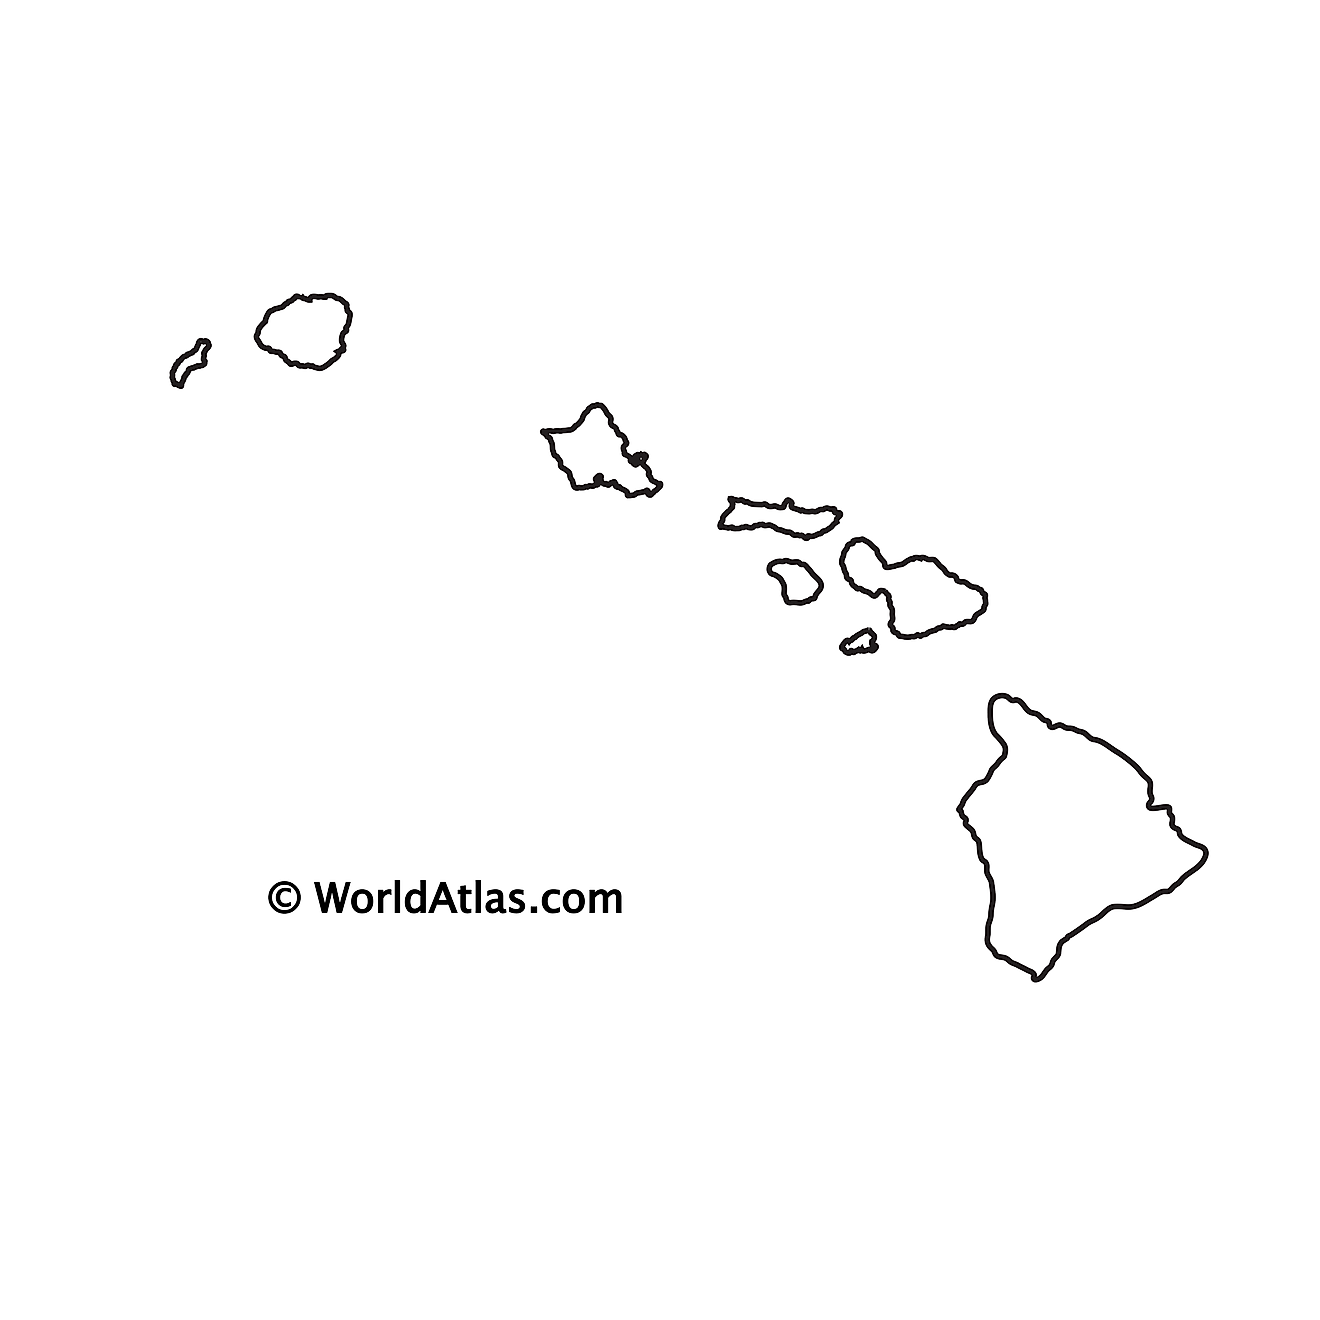 Blank Outline Map of Hawaii